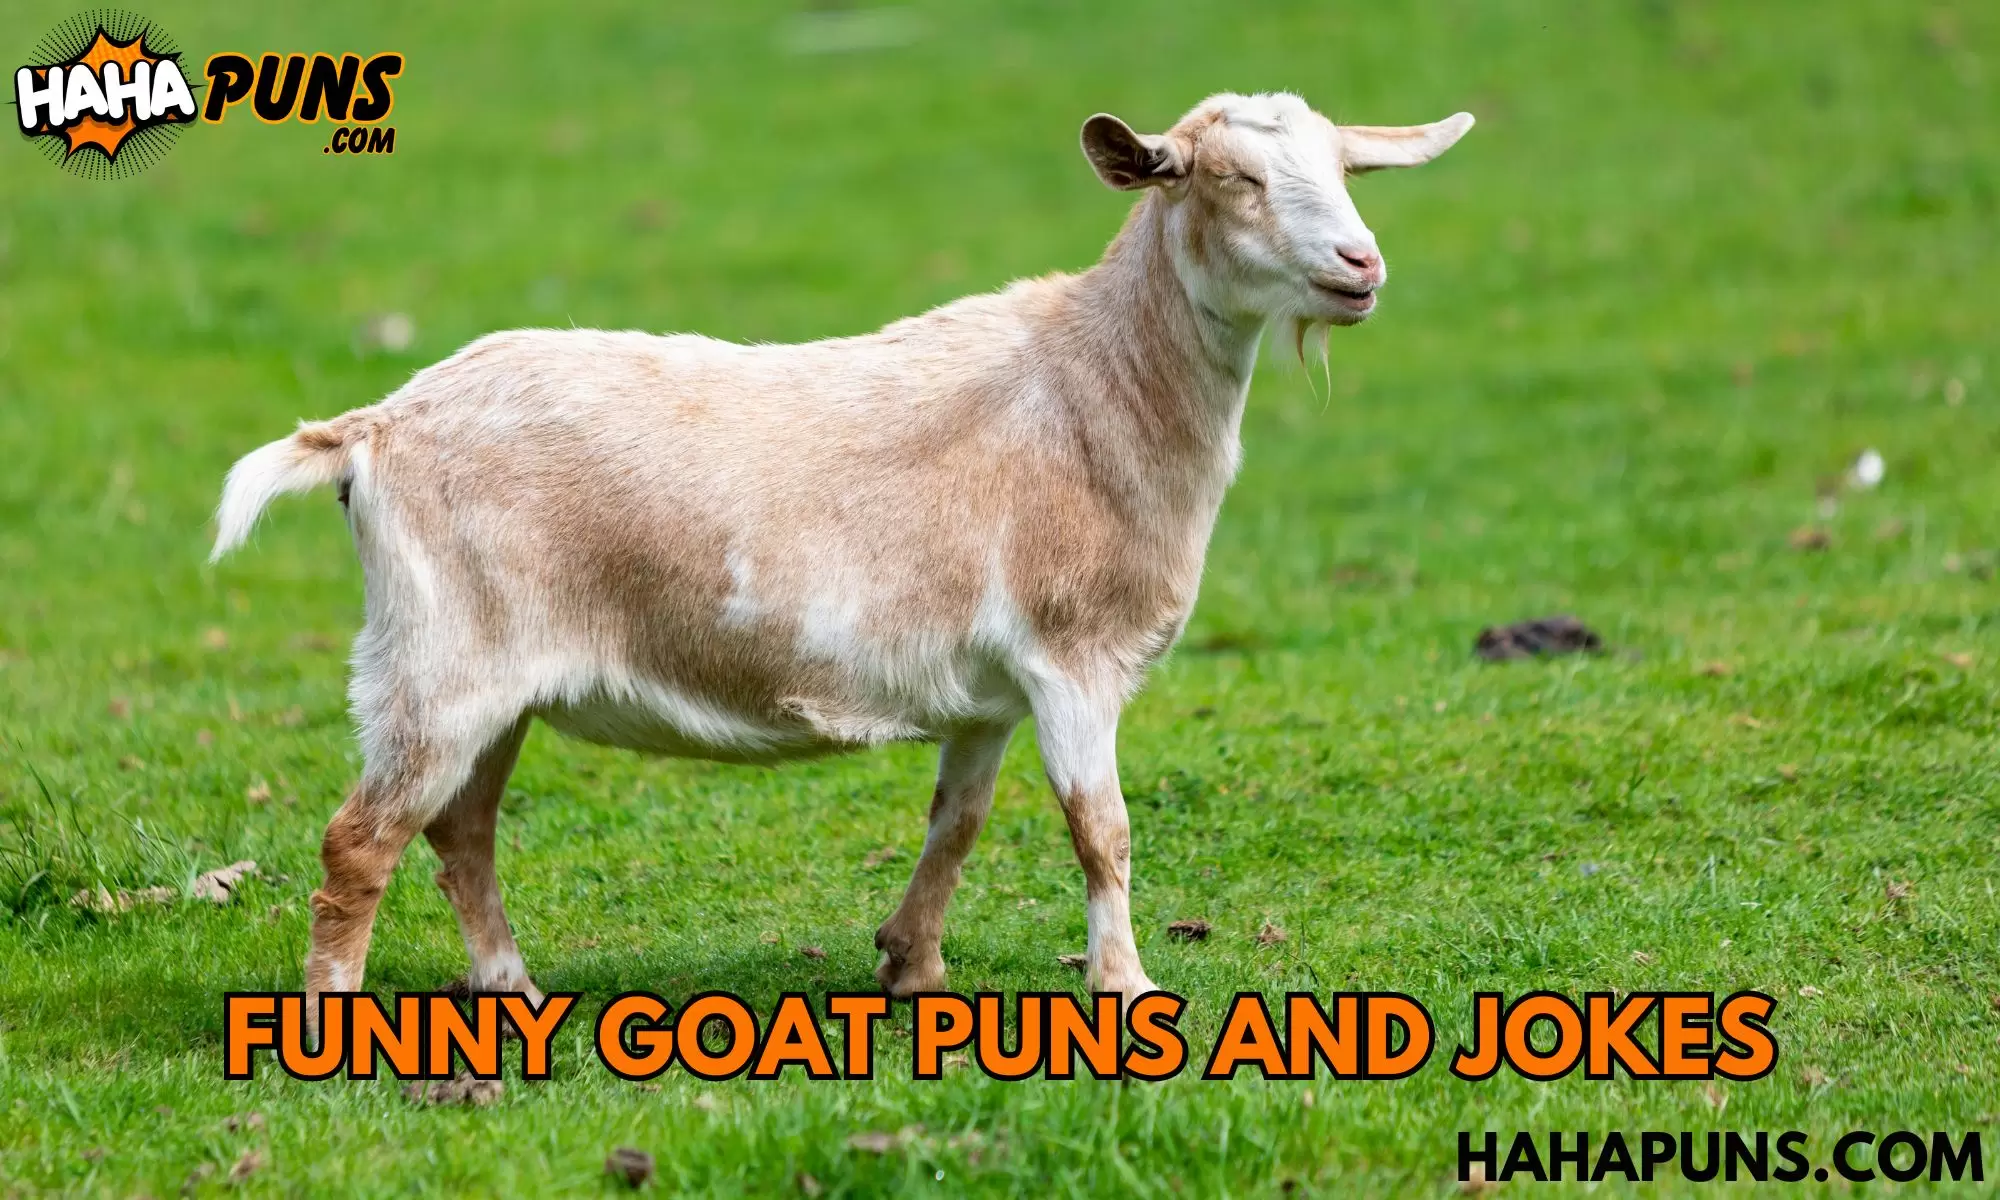 Funny Goat Puns and Jokes